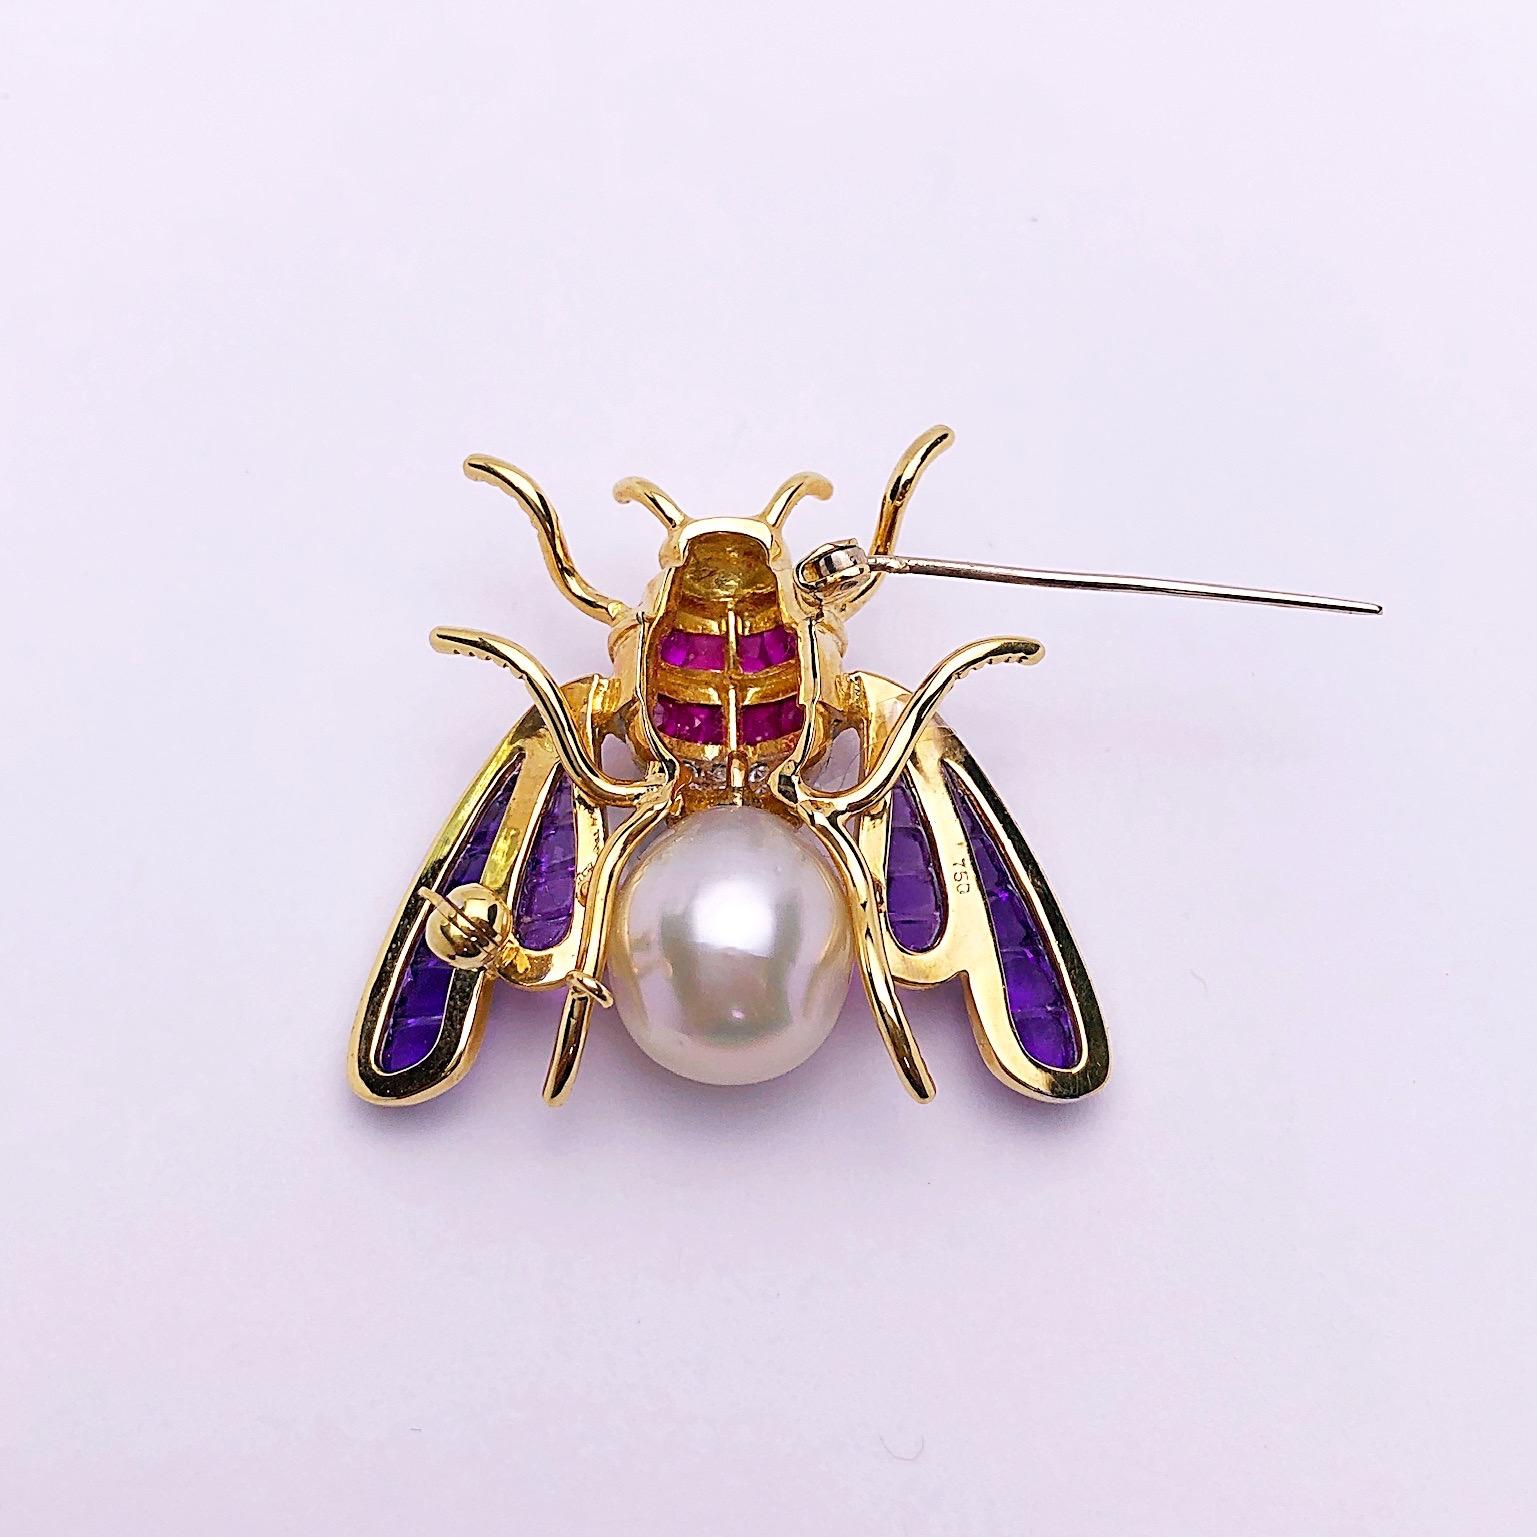 Sugarloaf Cabochon 18 Karat Yellow Gold Bee Brooch with Ruby, Diamond, Amethyst and South Sea Pearl